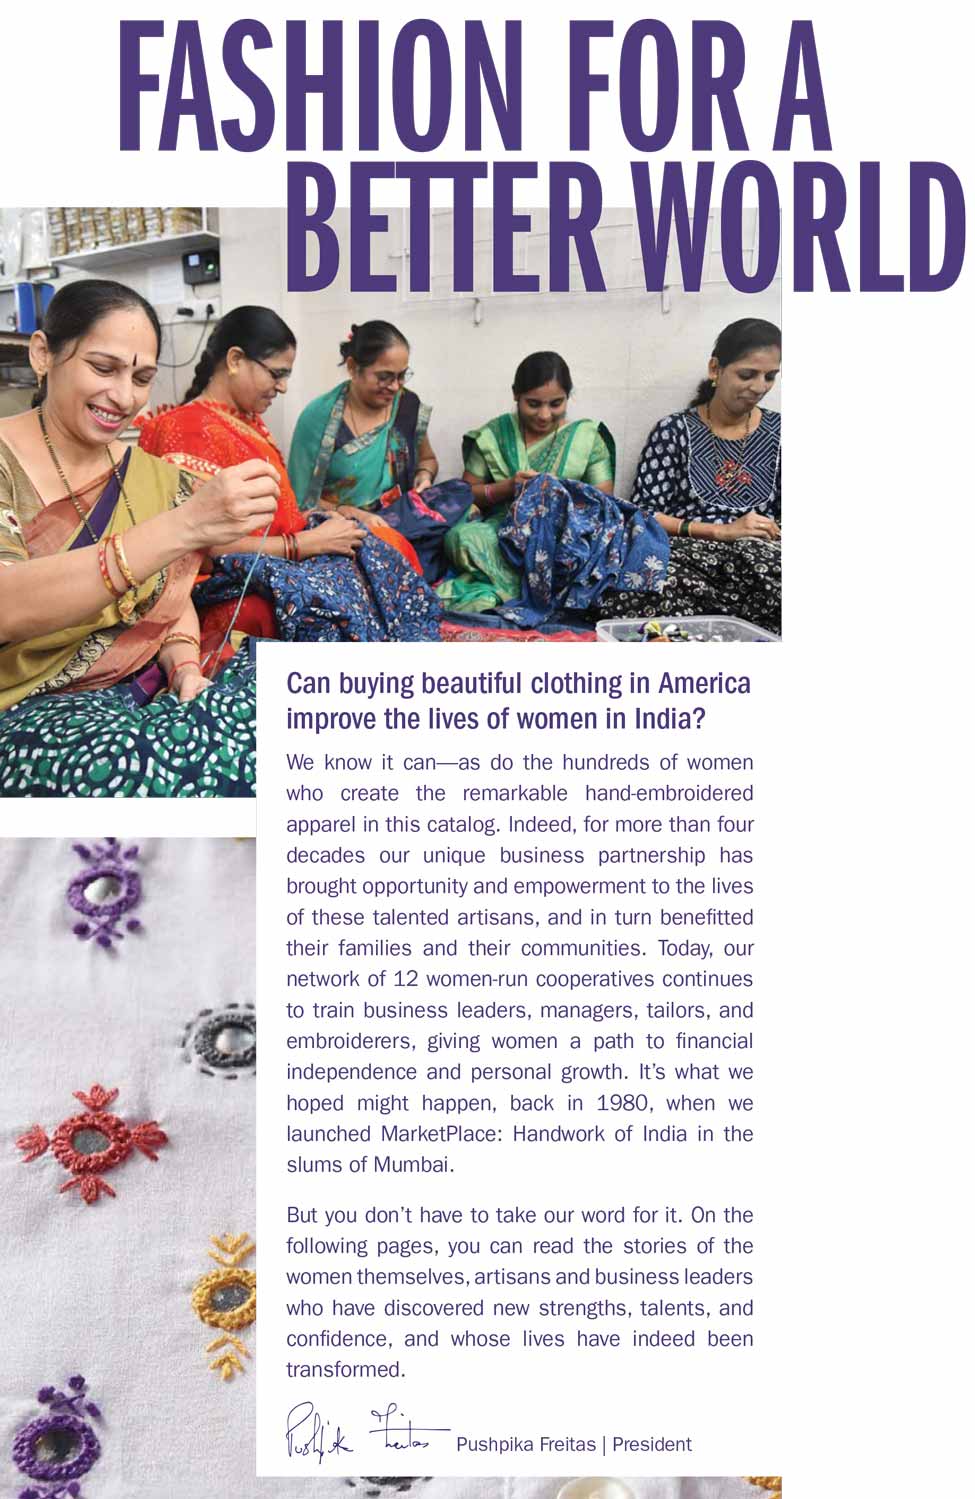 Can buying beautiful clothing in America improve the lives of women in India? We know it can--as do the hundreds of women who create the remarkable hand-embroidered apparel in this catalog. Indeed, for more than four decades our unique business partnership has brought opportunity and empowerment to the lives of these talented artisans, and in turn benefitted their families and their communities. Today, our network of 12 women-run cooperatives continues to train business leaders, managers, tailors, and embroiderers, giving women a path to financial independence and personal growth. It's what we hoped might happen, back in 1980, when we launched MarketPlace: Handwork of India in the slums of Mumbai. But you don't have to take our word for it. On the following pages, you can read the stories of the women themselves, artisans and business leaders who have discovered new strengths, talents, and confidence, and whose lives have indeed been transformed.